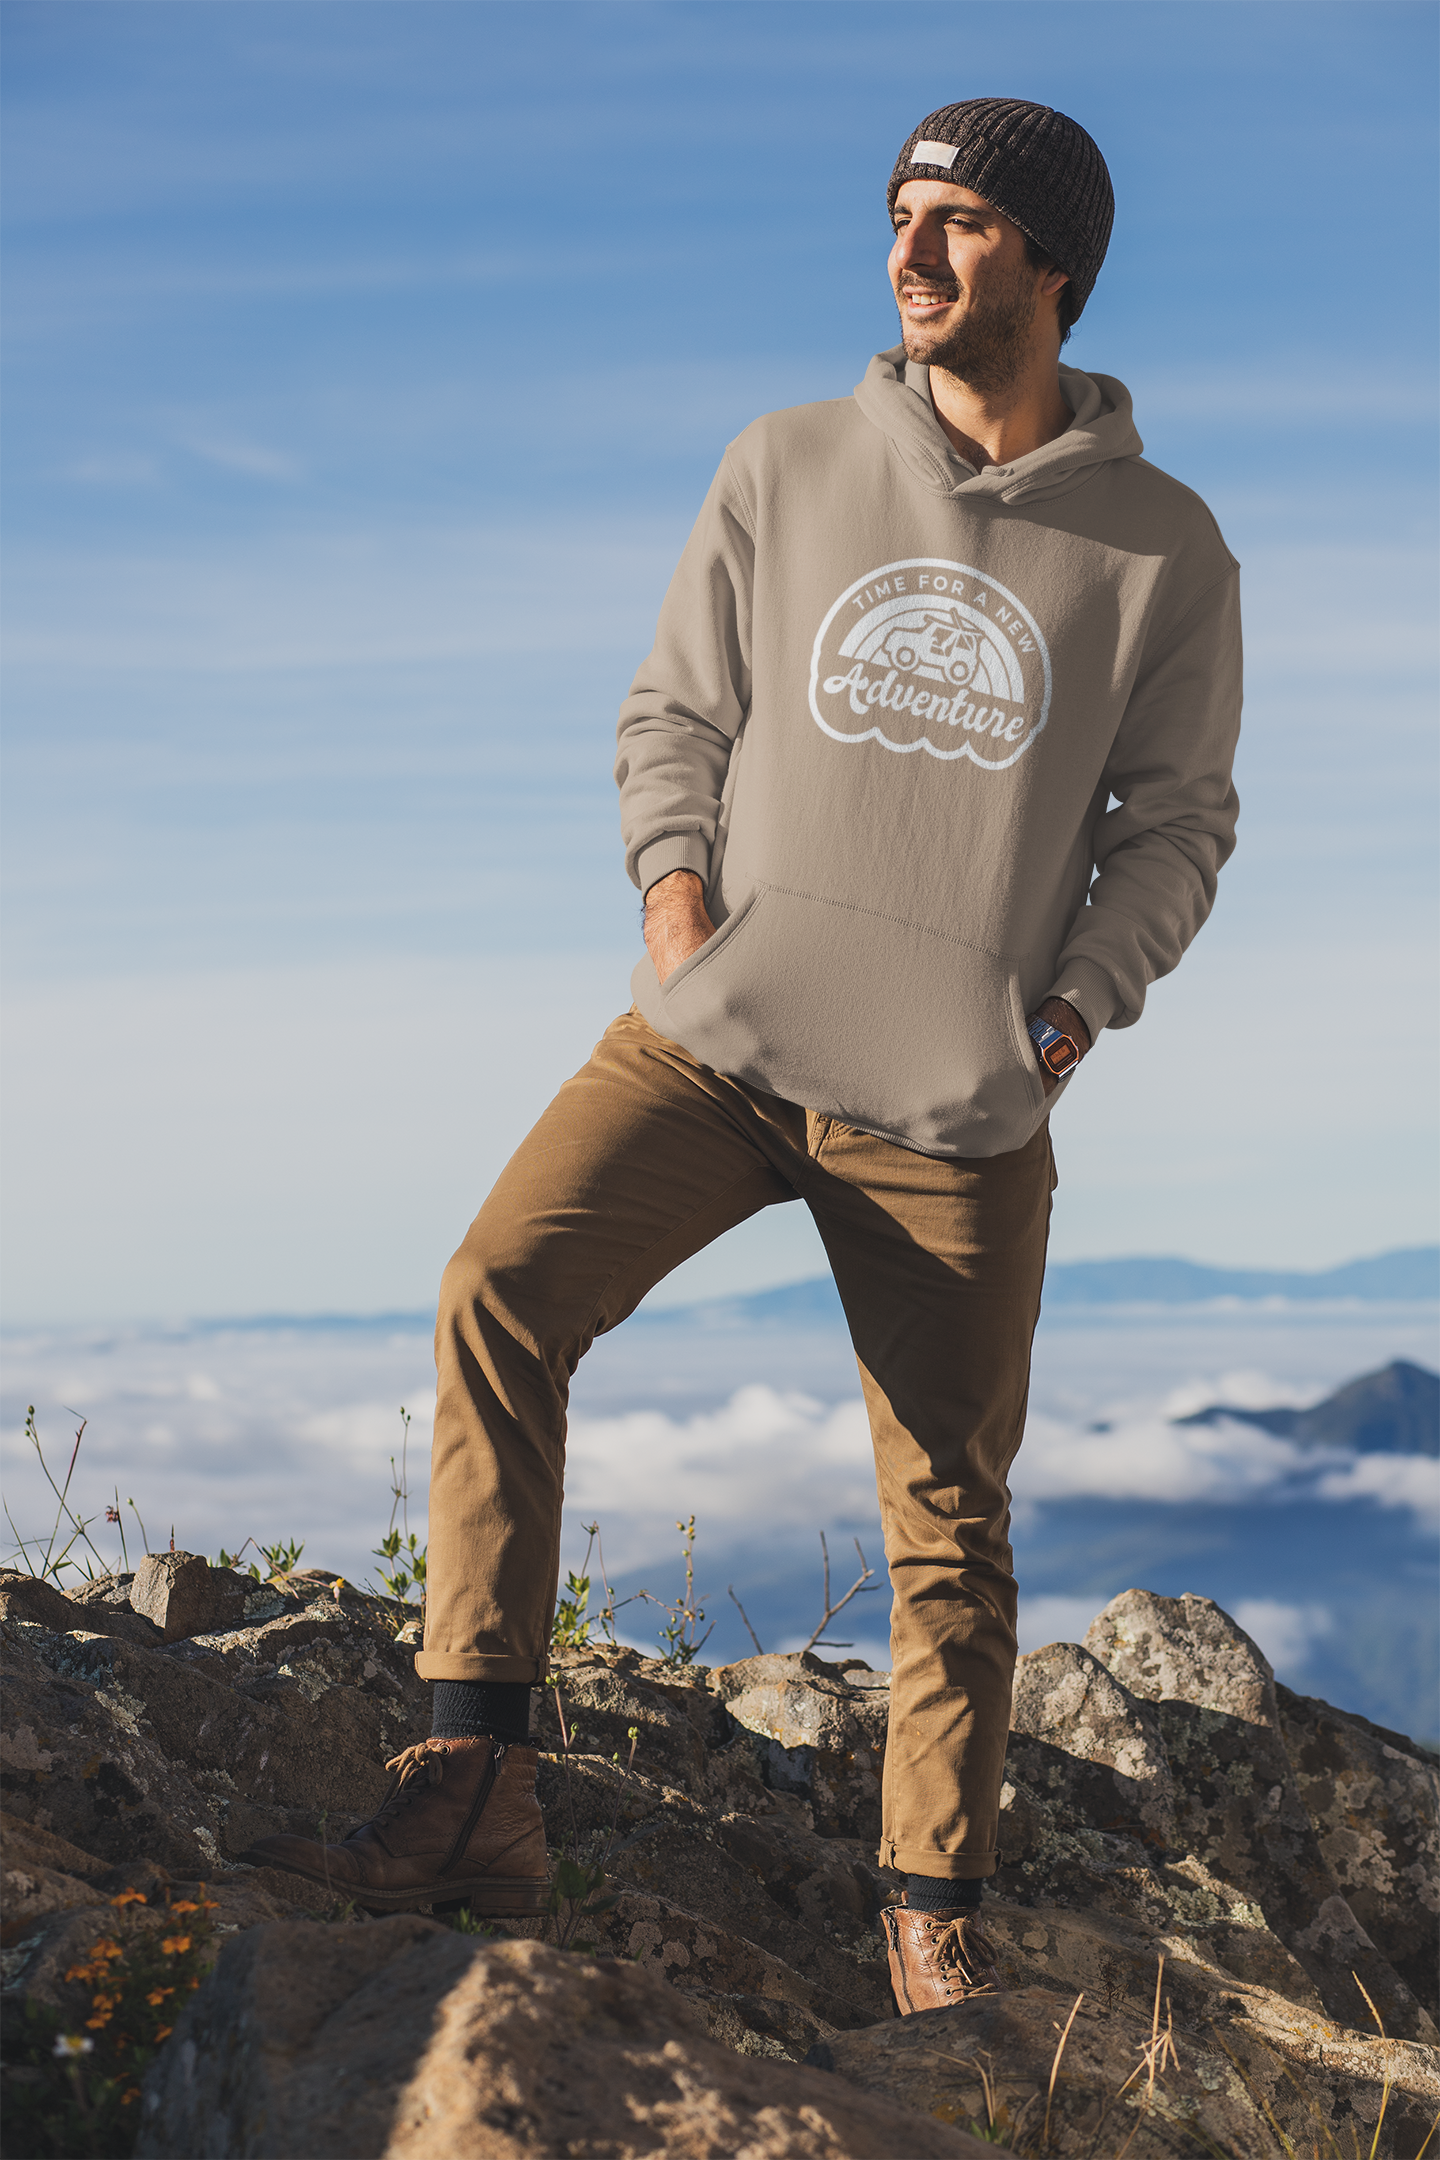 Time For A New Adventure Hooded Sweatshirt. Design is in a cloud bubble with time for a new adventure at the top curved with an off road vehicle in the middle with a rainbow behind it, and adventure below it. This the design in a white on the sandstone tan hoodie. The sweatshirt is on a man with a winter hat on, khakis and hiking boots on top of a mountain facing the sunlight.